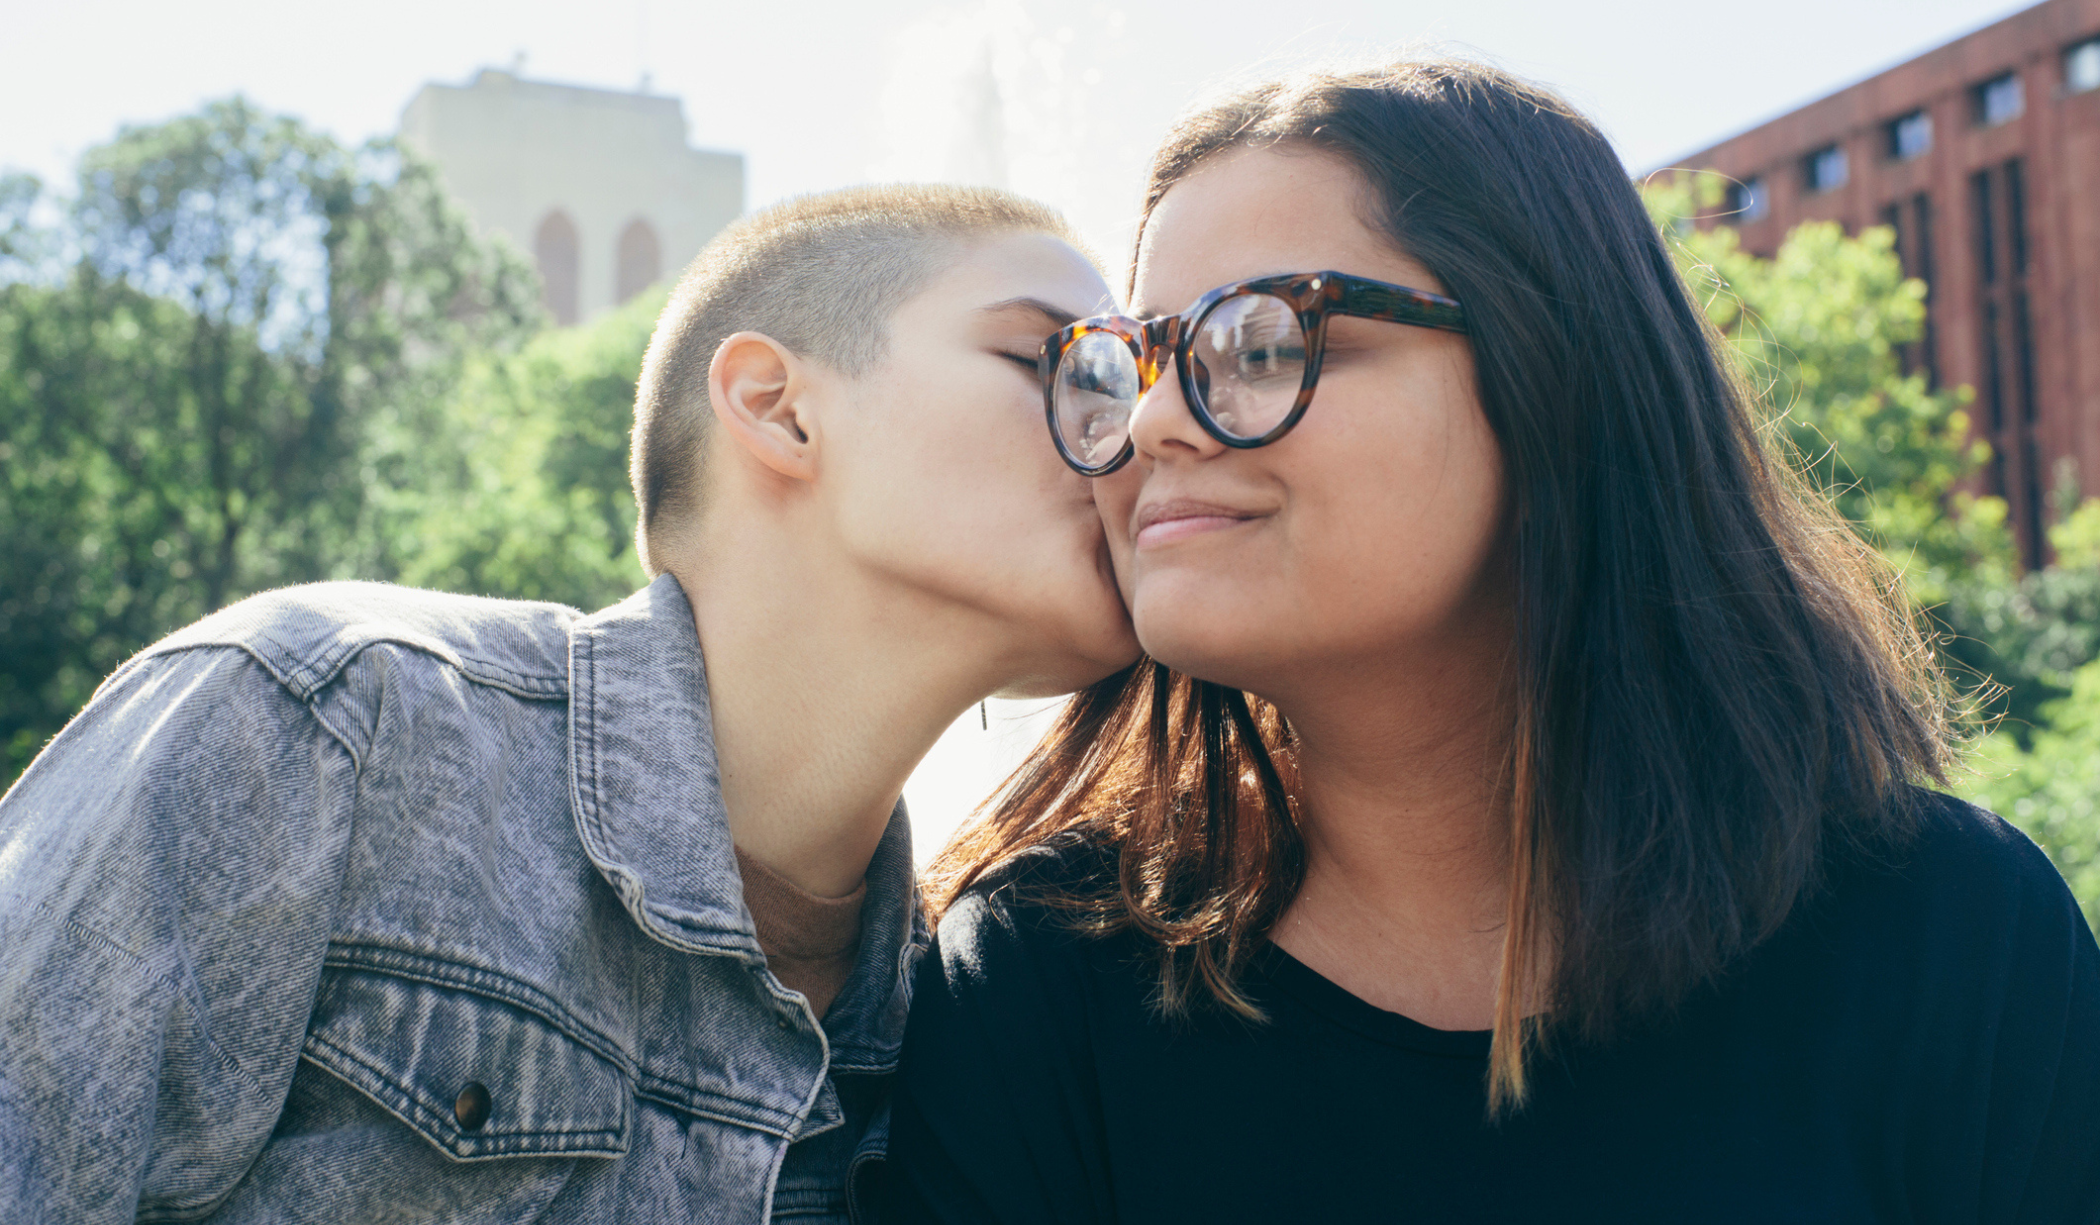 LGBTQ+ Health: Building Safe Communities For All